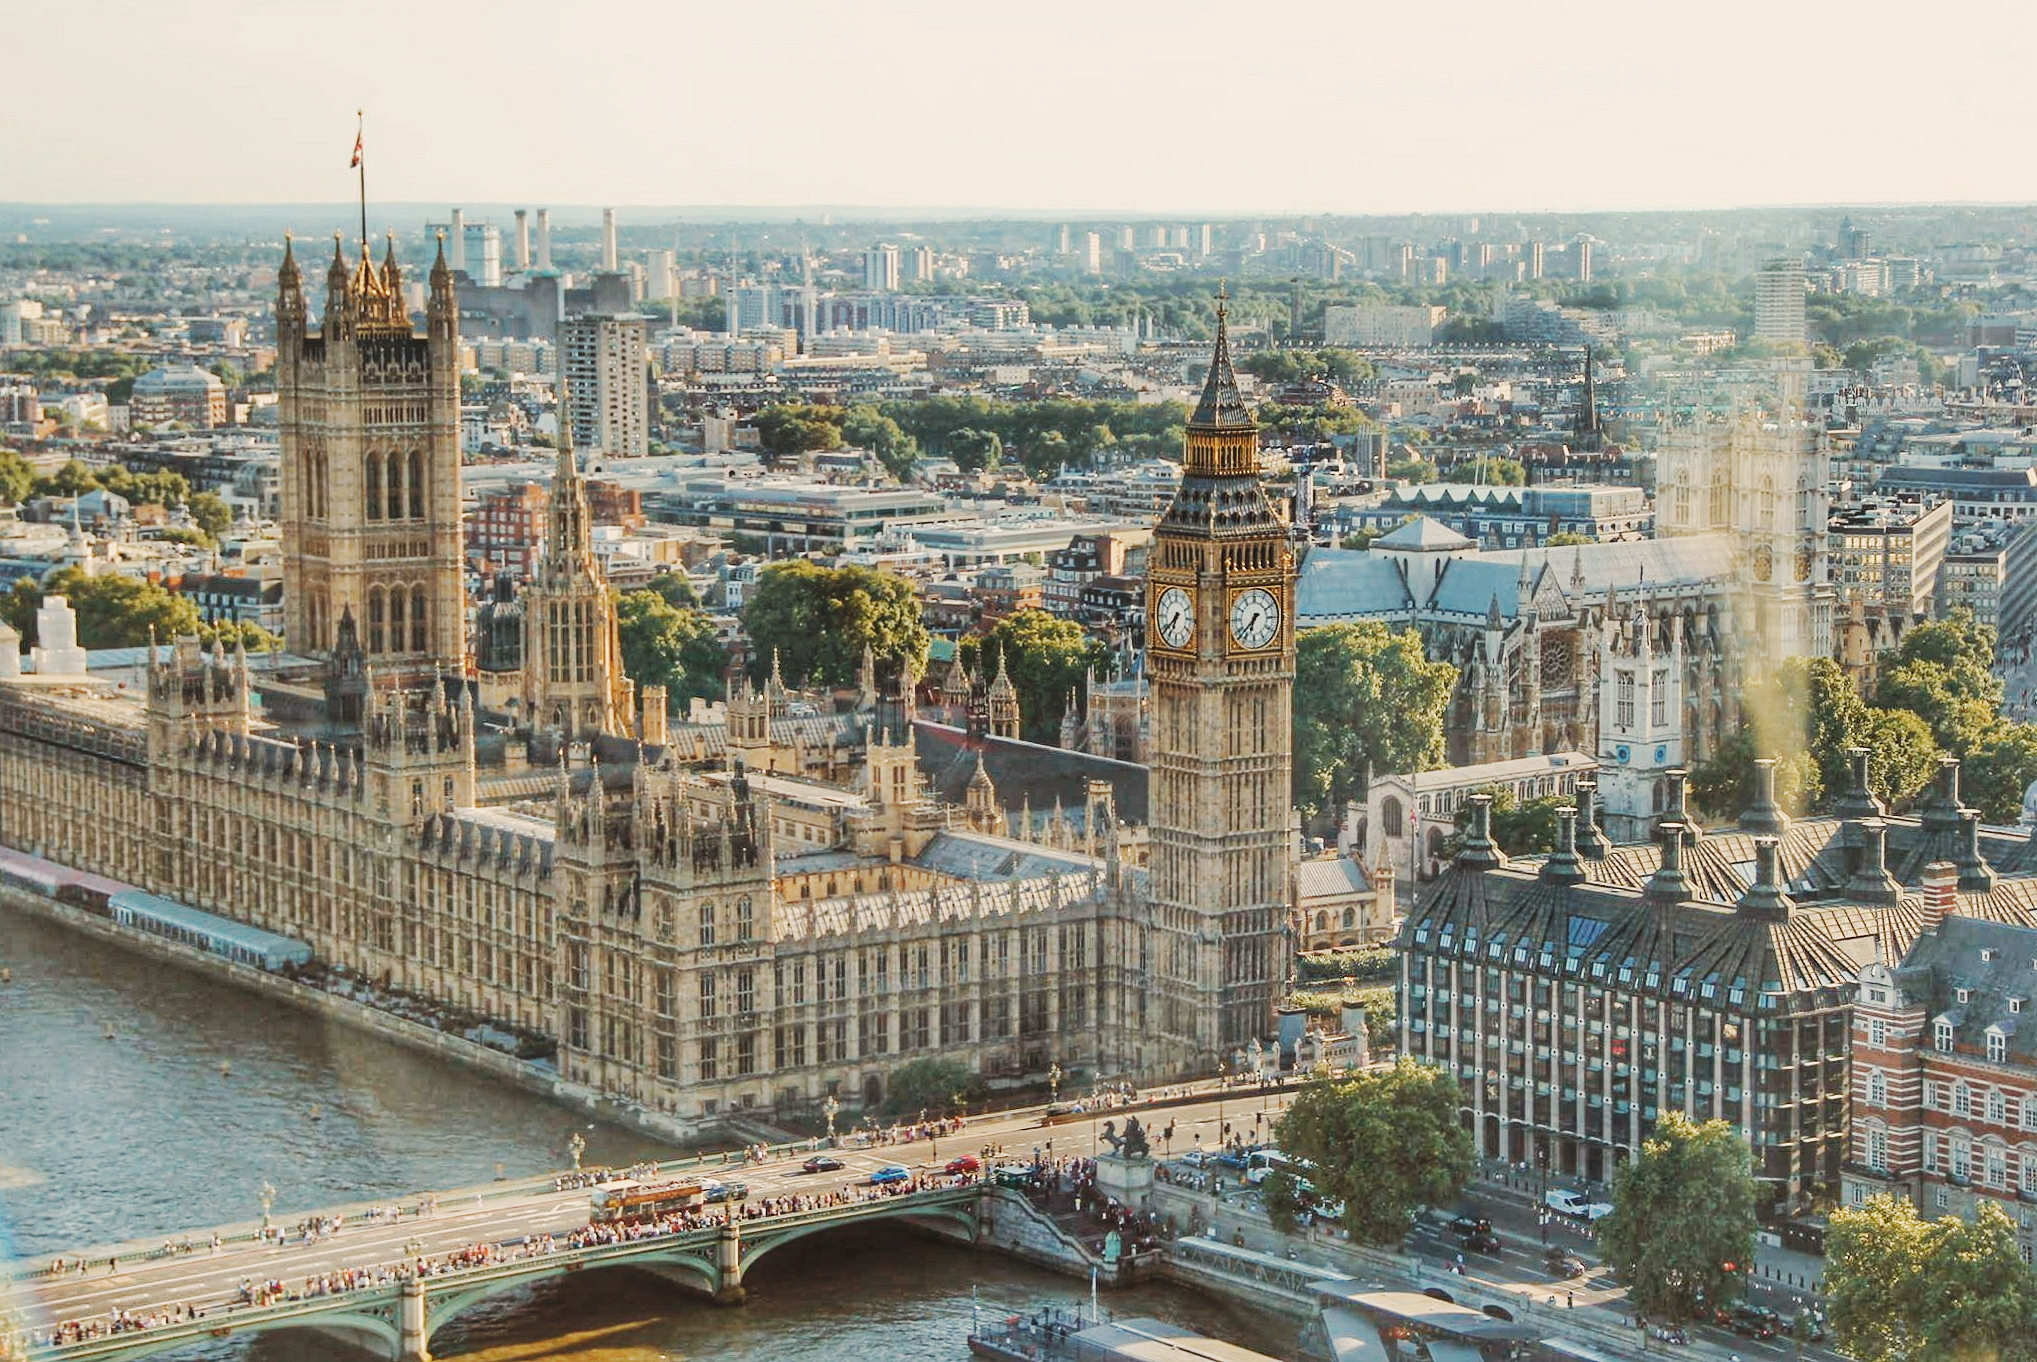 Image of Big Ben and surroundings in London, England